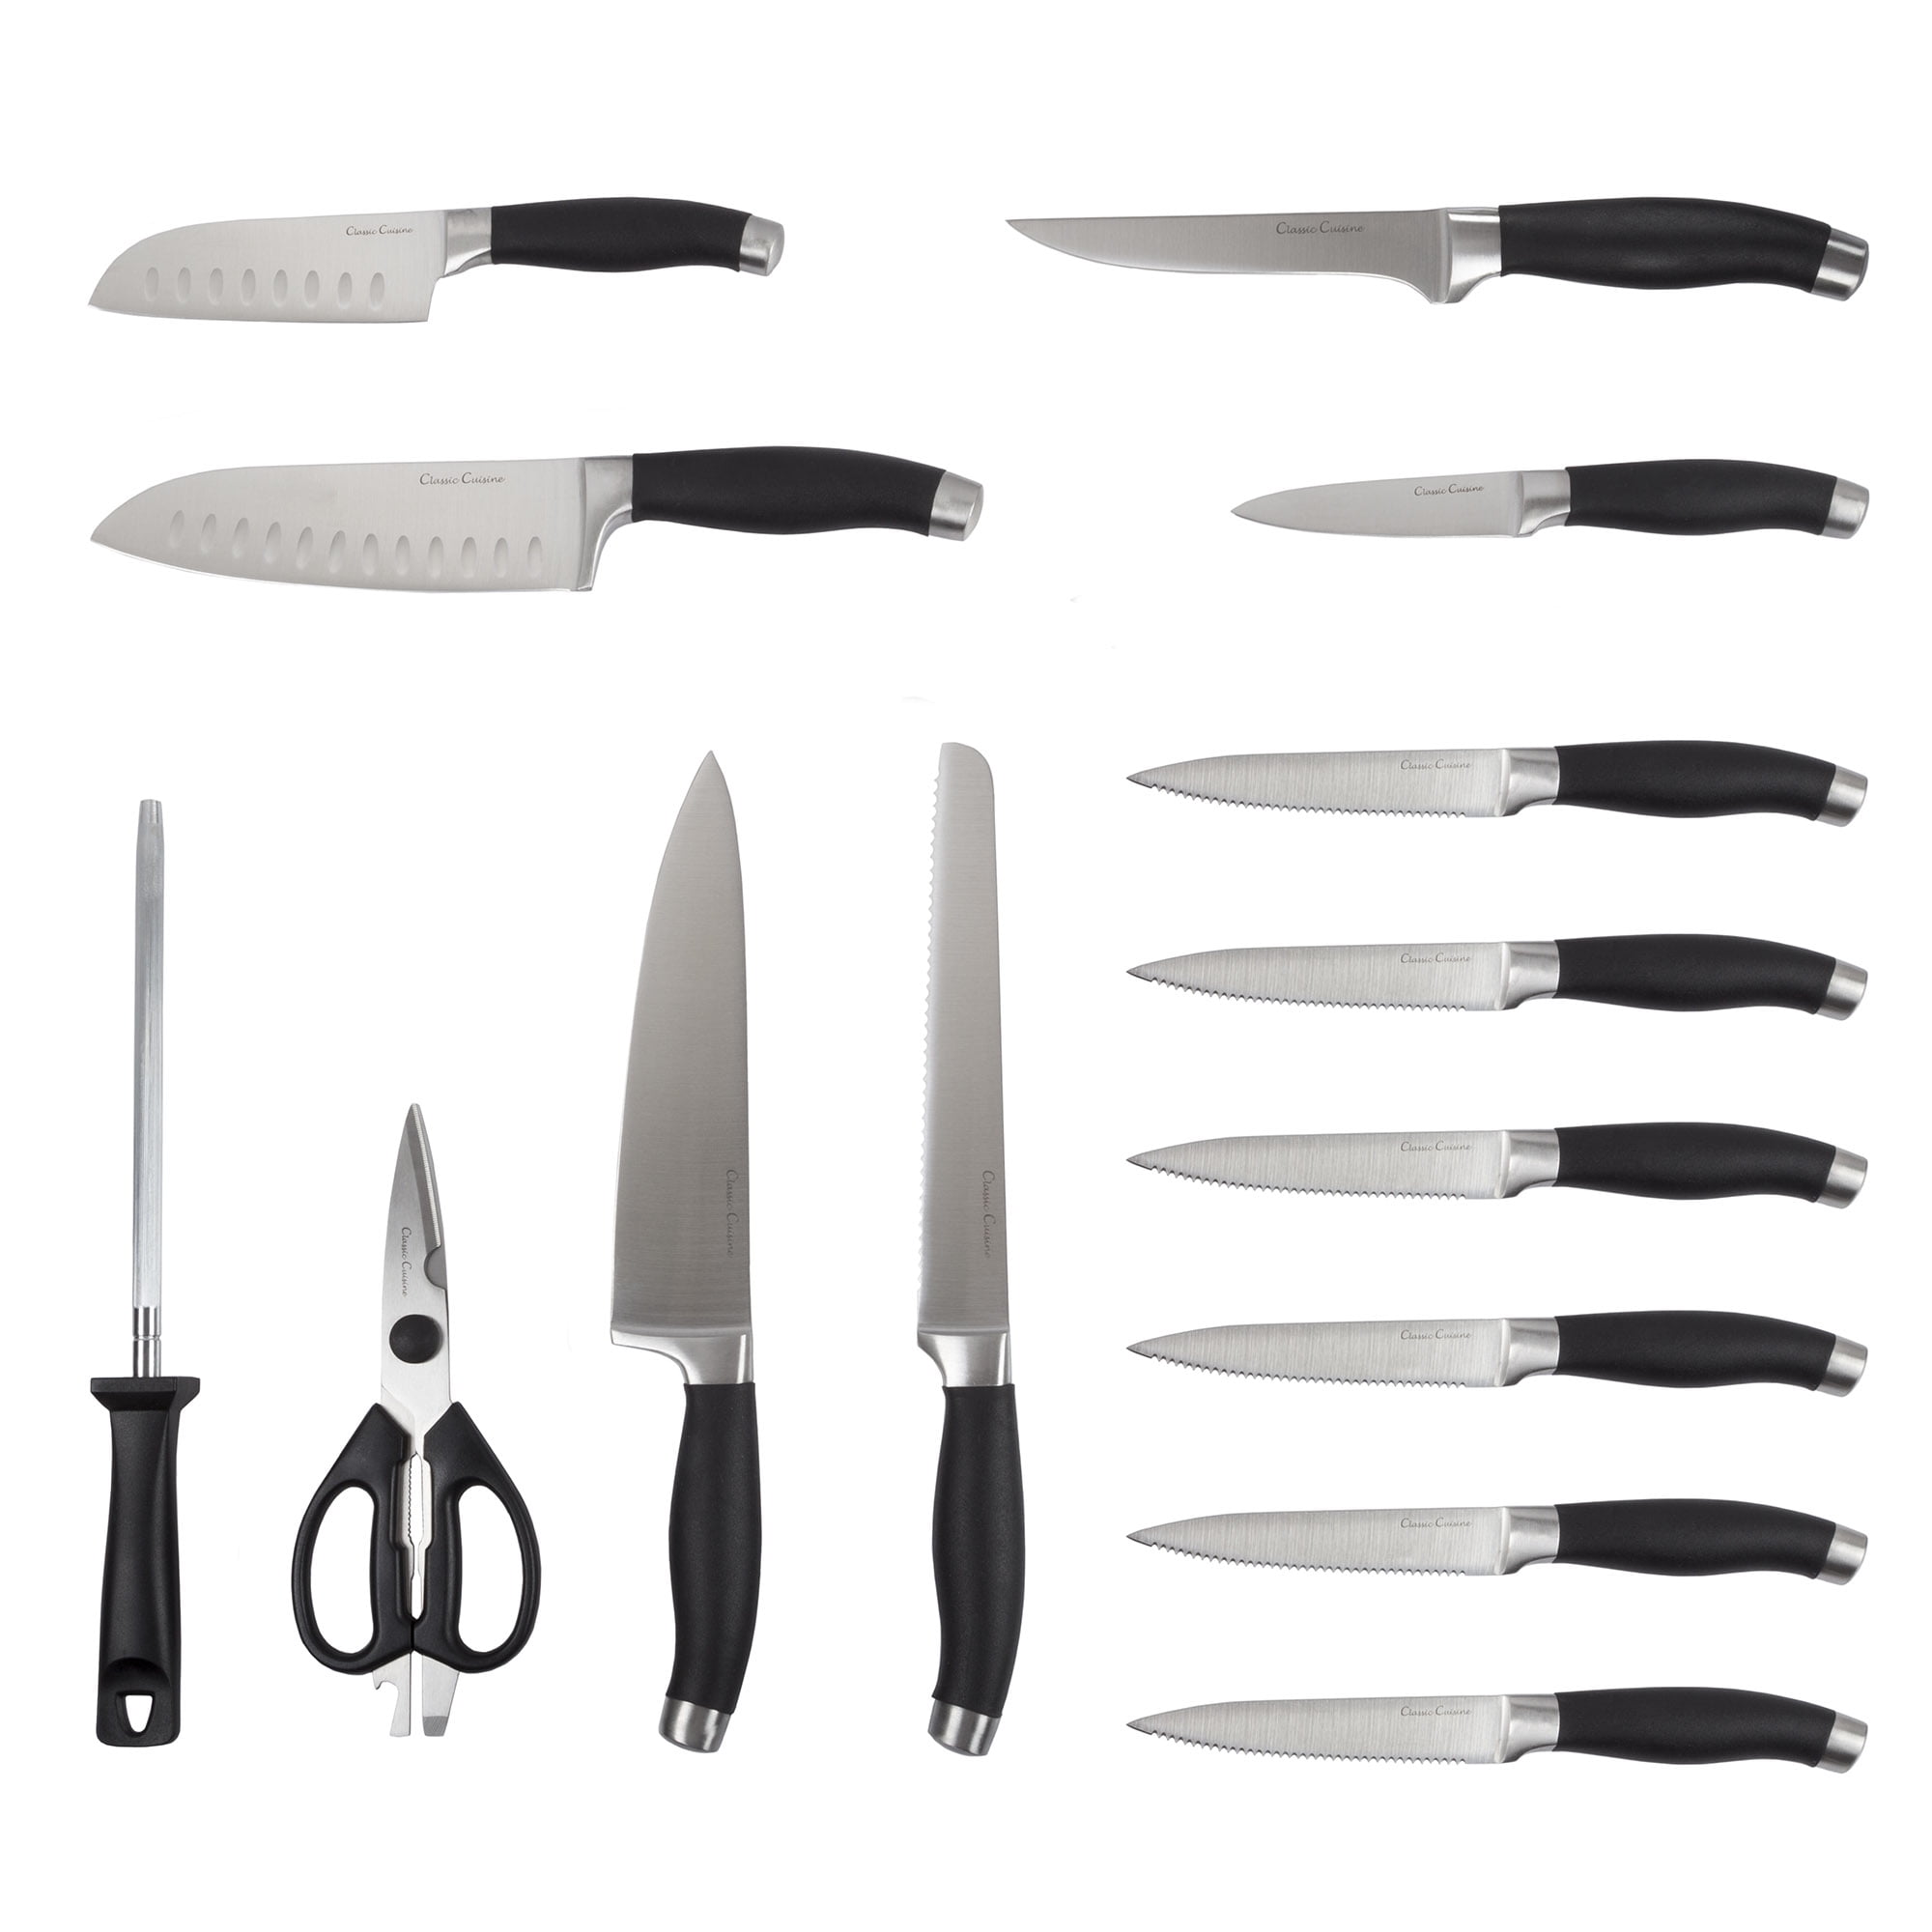  Professional 15-Piece German High Carbon Stainless Steel  Kitchen Knife Set, Ocean Series Premium Forged Full Tang Chef Knives Set  with Rubber Wood Block, Black: Home & Kitchen